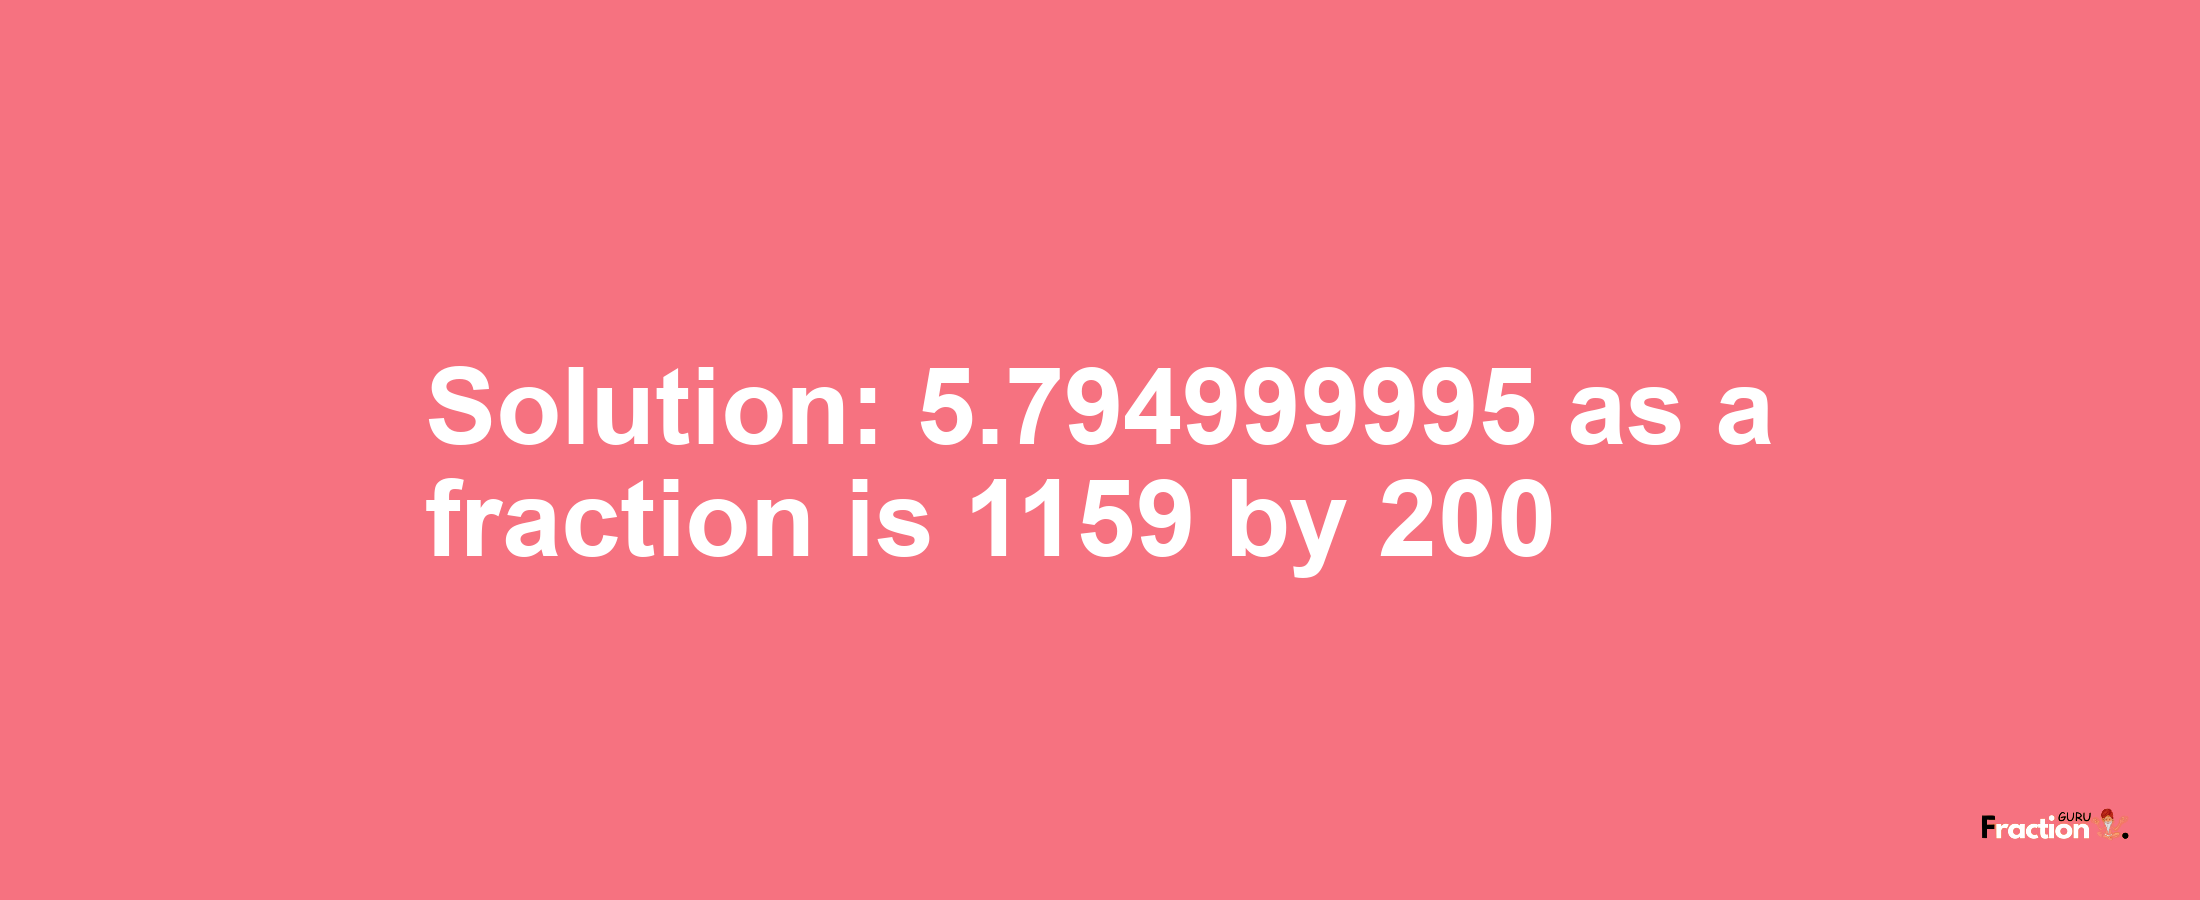 Solution:5.794999995 as a fraction is 1159/200